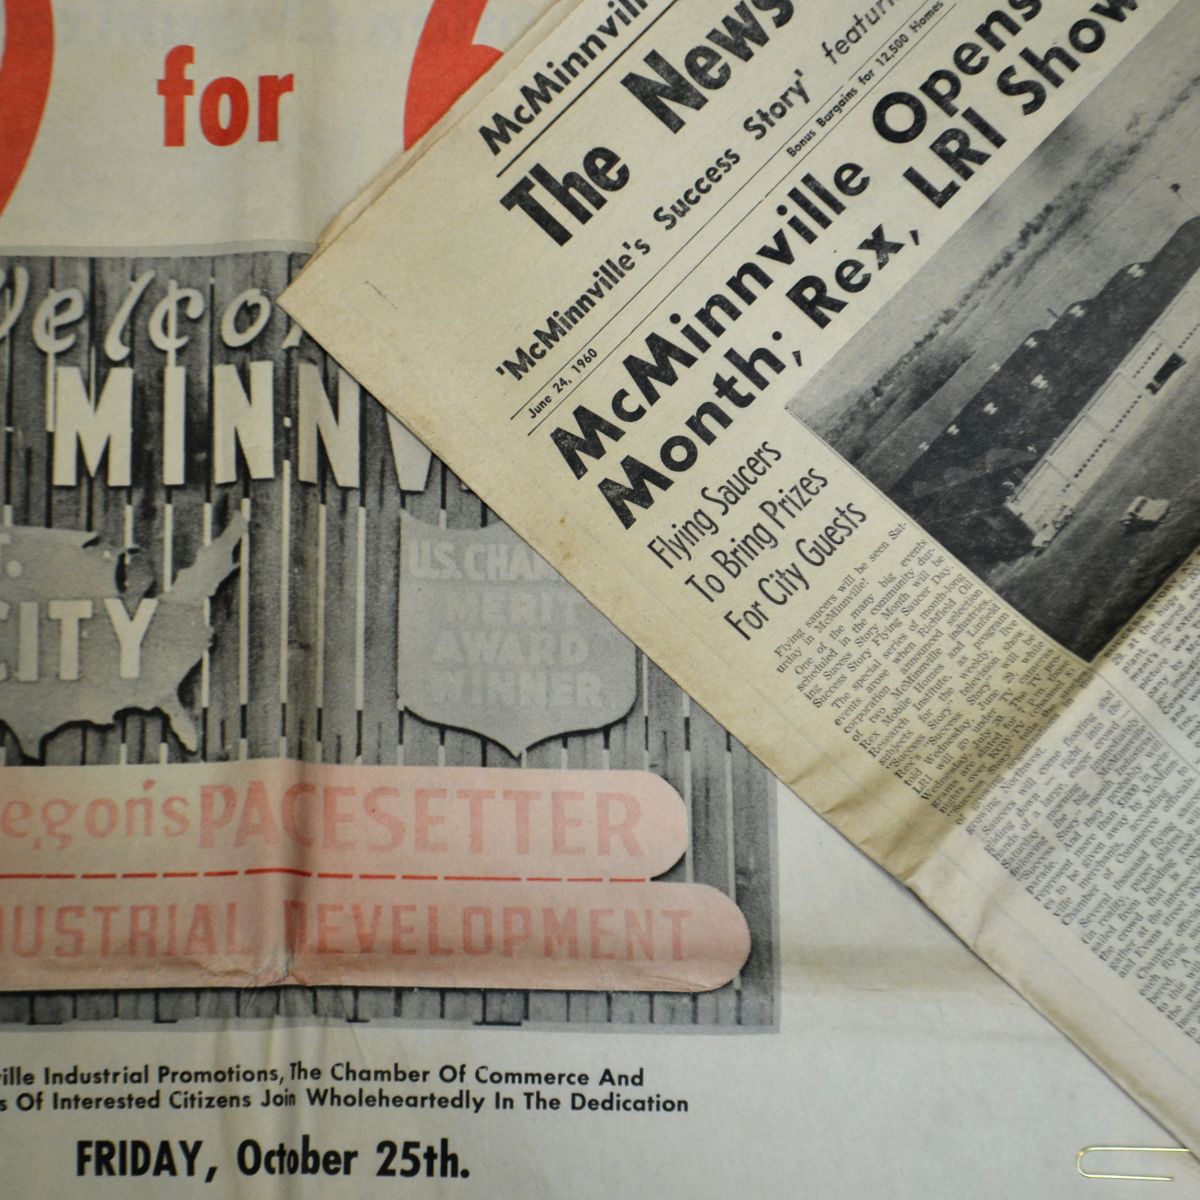 An old newspaper image showing MIP promise of 9 for '69